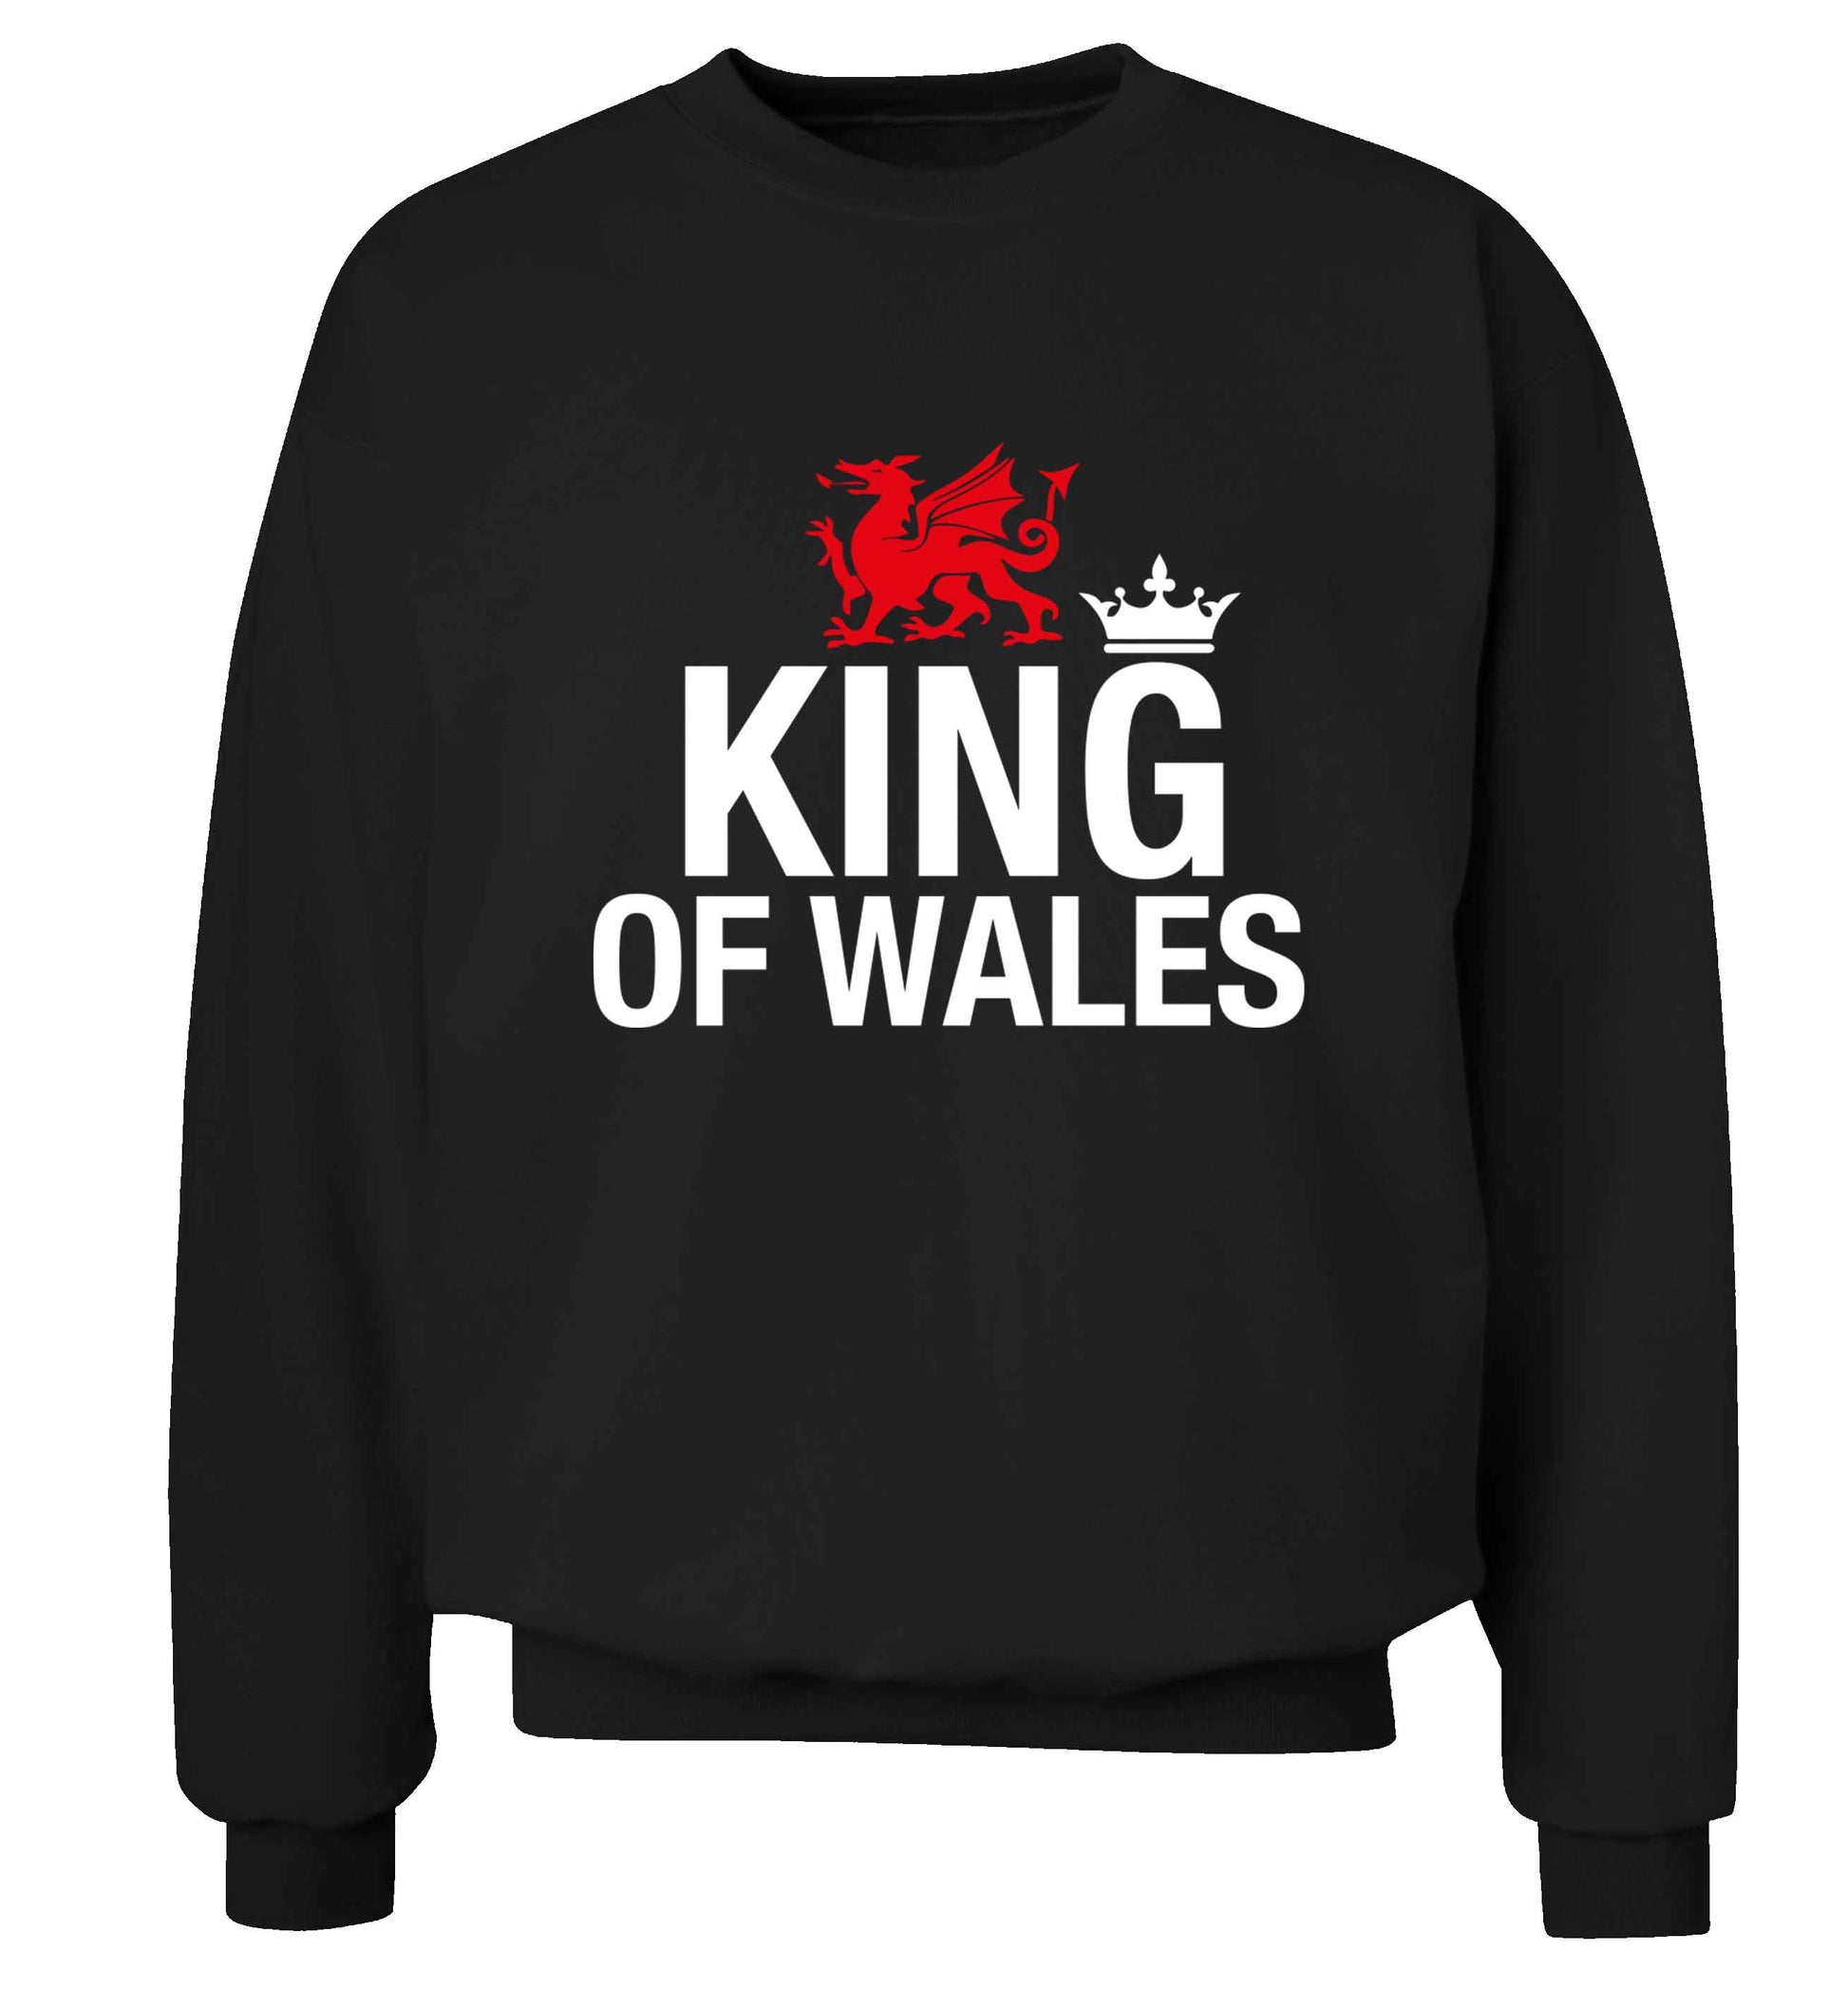 King of Wales Adult's unisex black Sweater 2XL